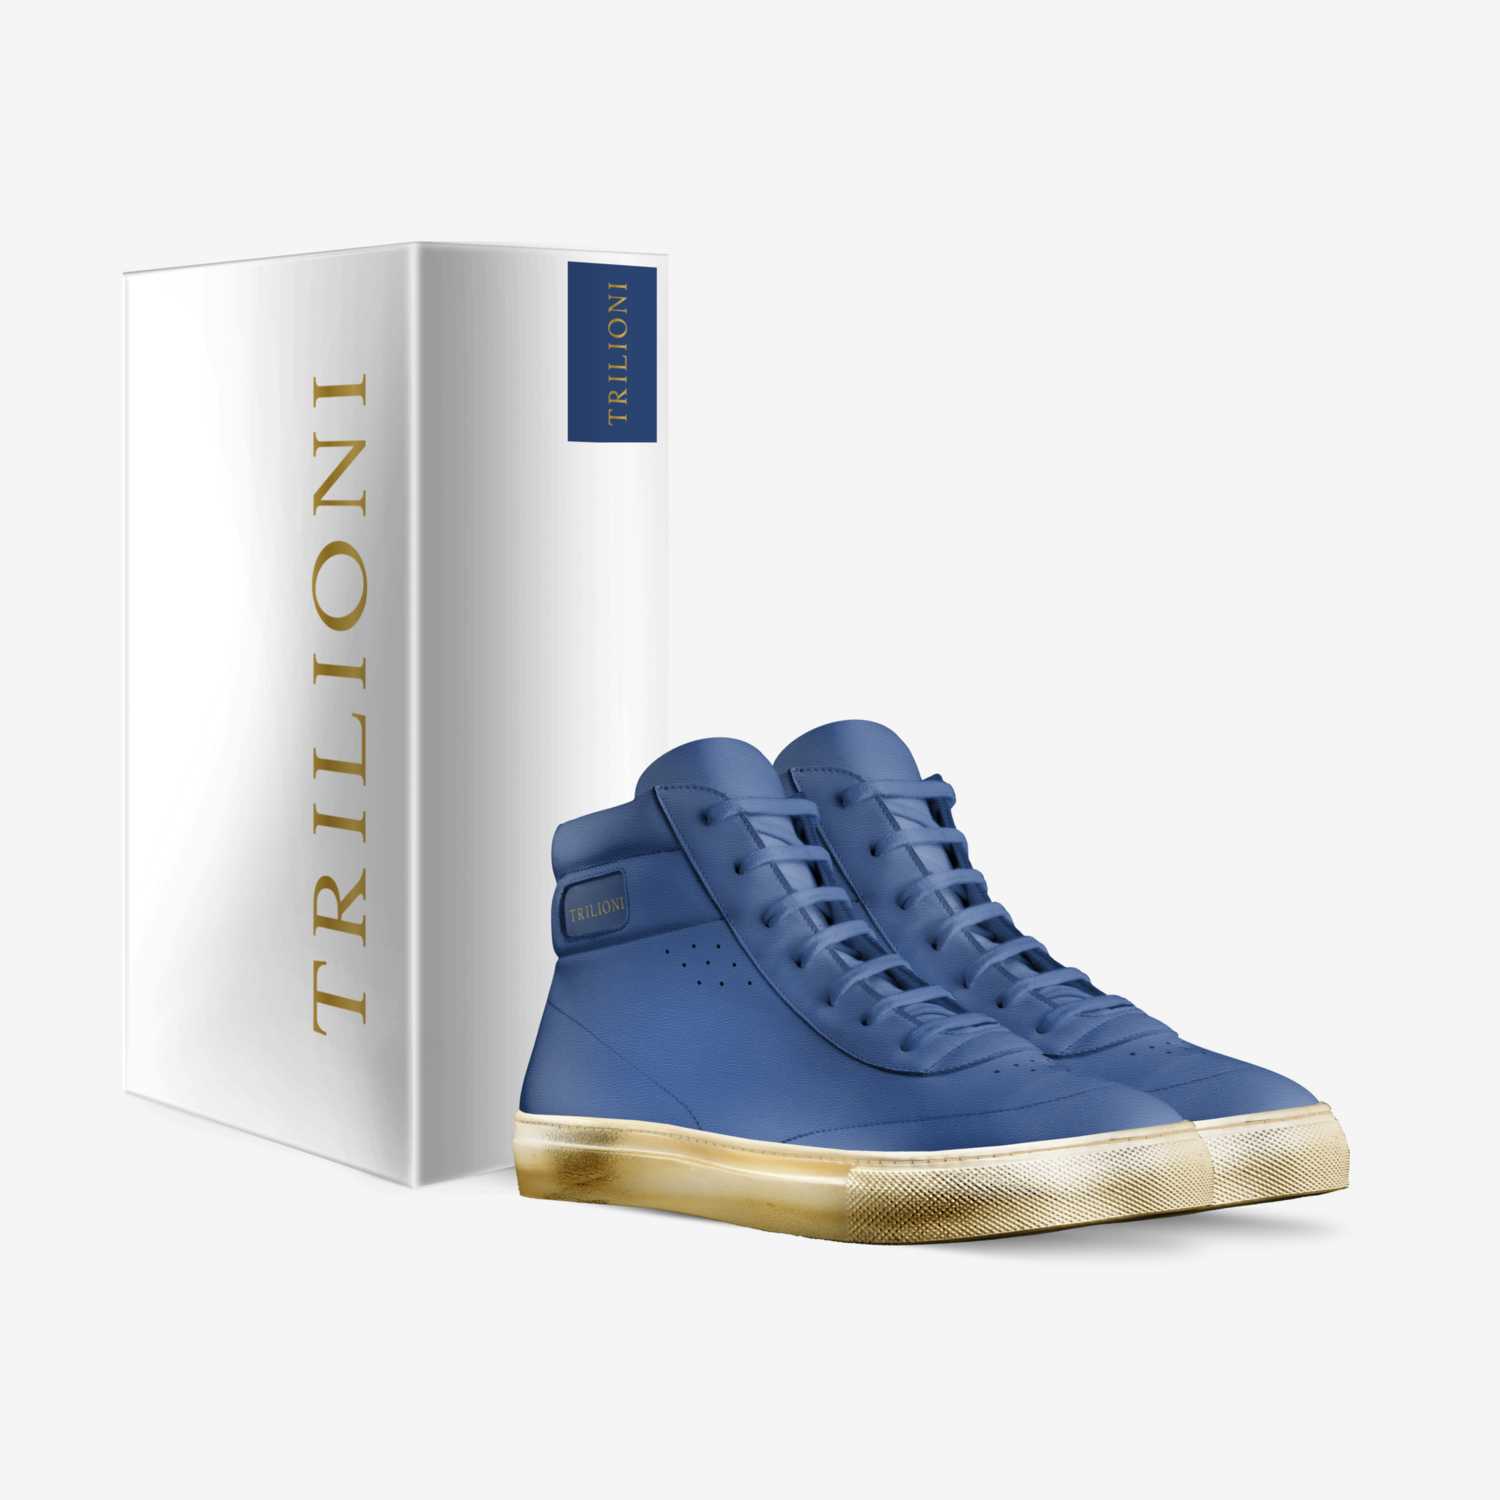 Trilioni Royalty  custom made in Italy shoes by Jay Frye | Box view